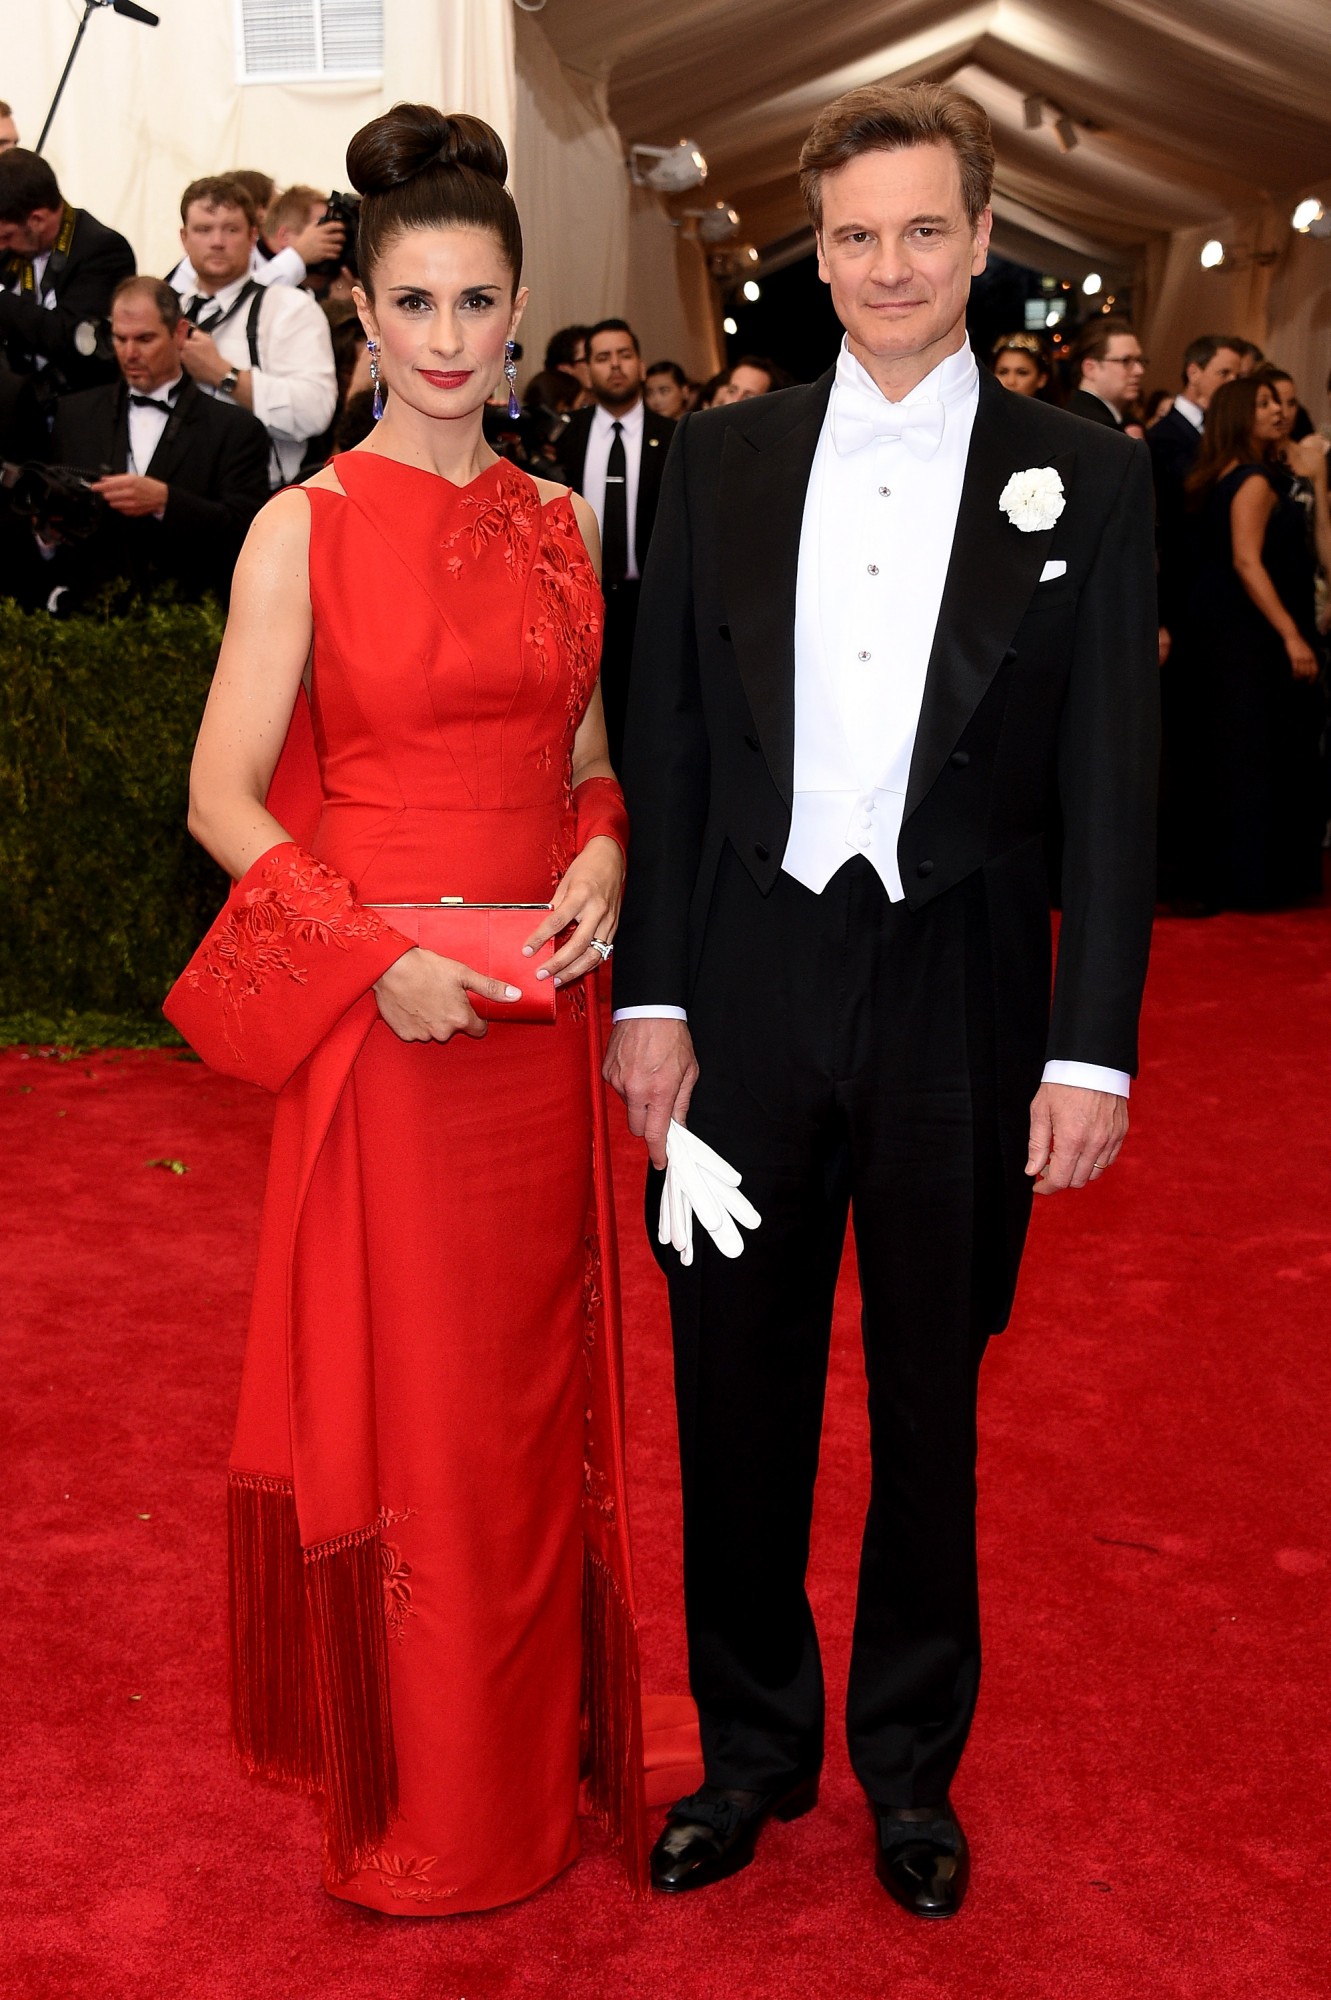 Livia Firth wears Chopard to the Met Gala, New York, May 4th, 2015